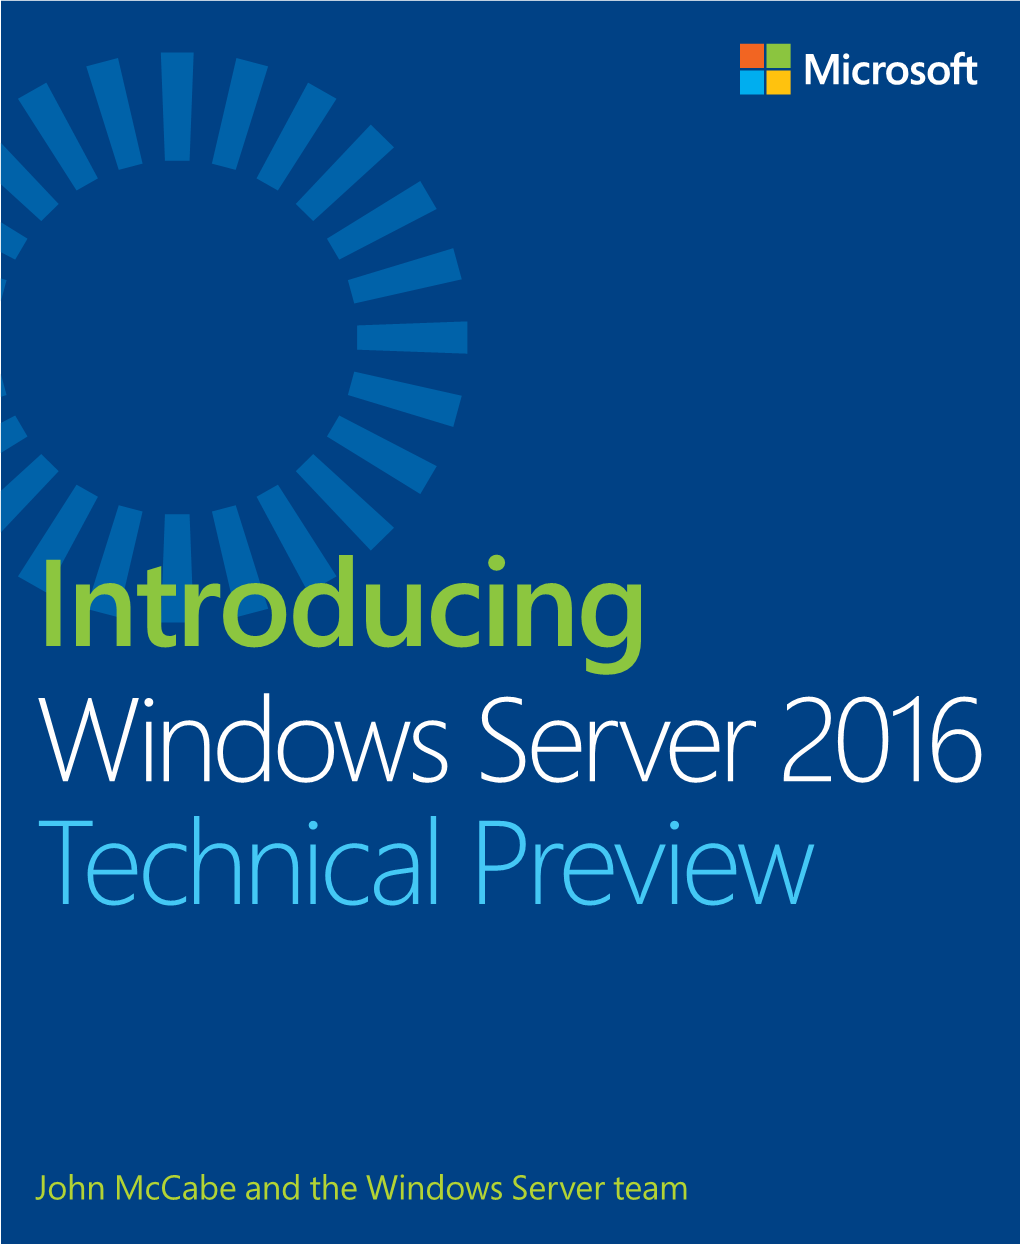 Introduced in Windows Server 2016 Technical Preview